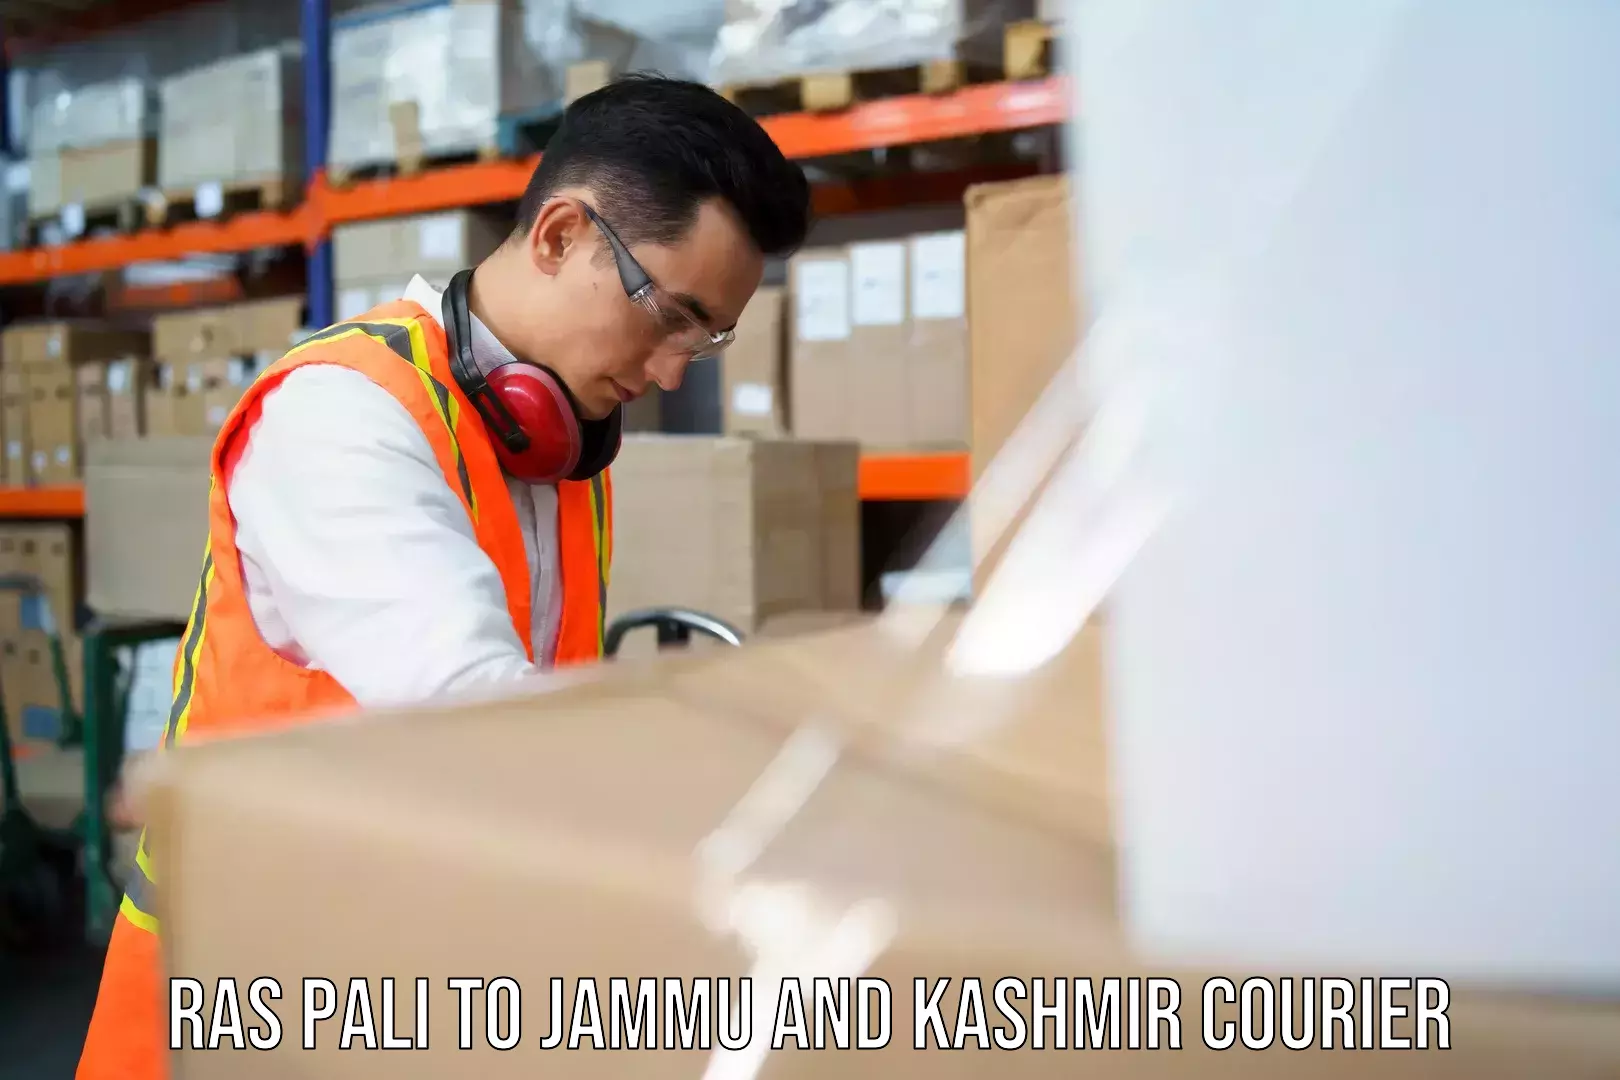 Full-service courier options Ras Pali to University of Jammu